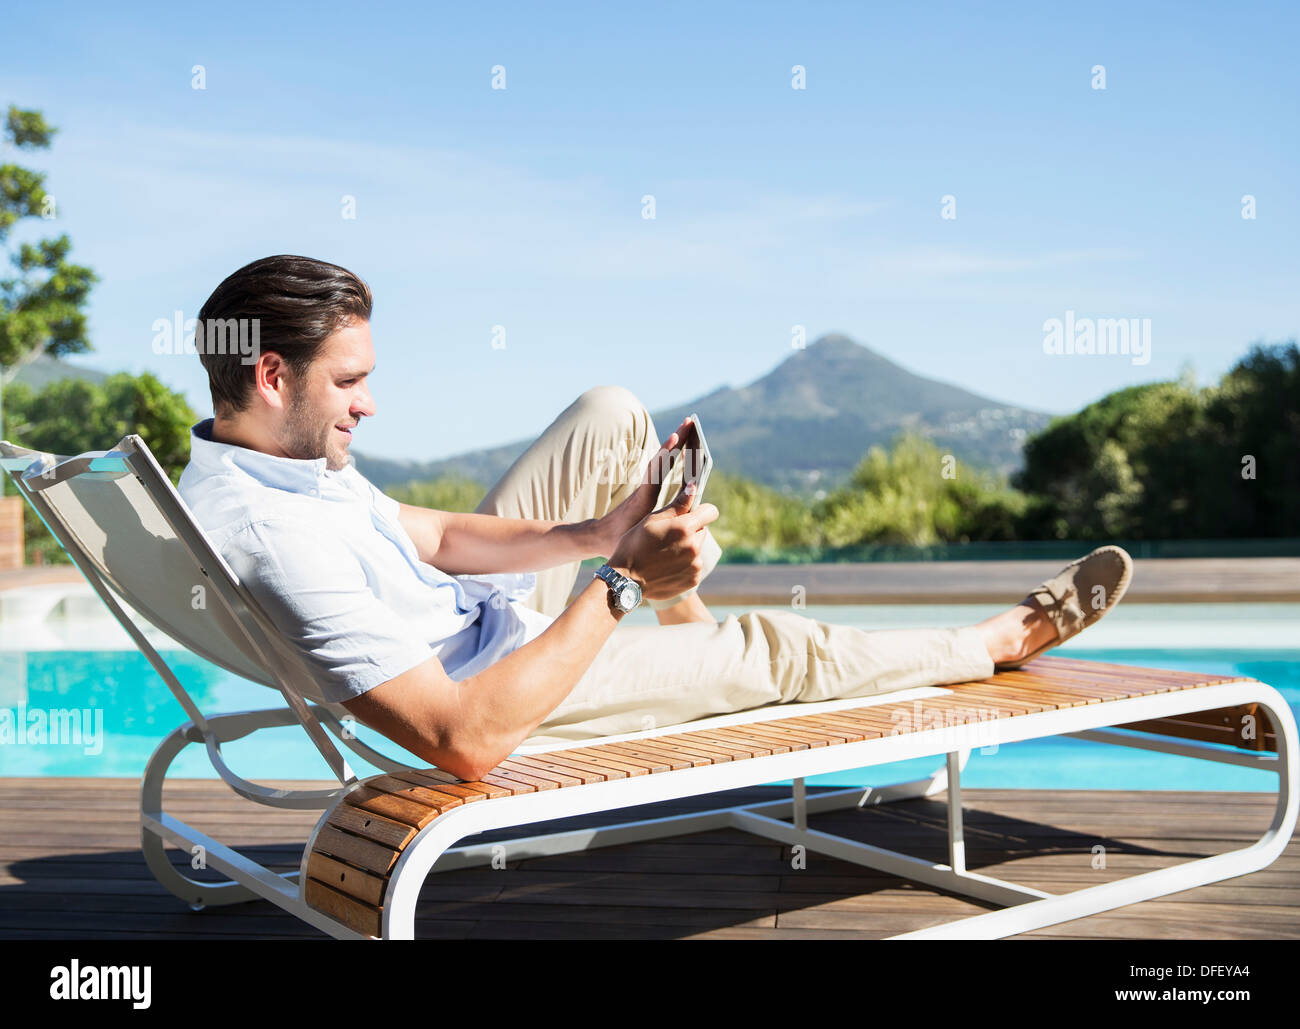 Man using digital tablet on lounge chair at poolside Banque D'Images